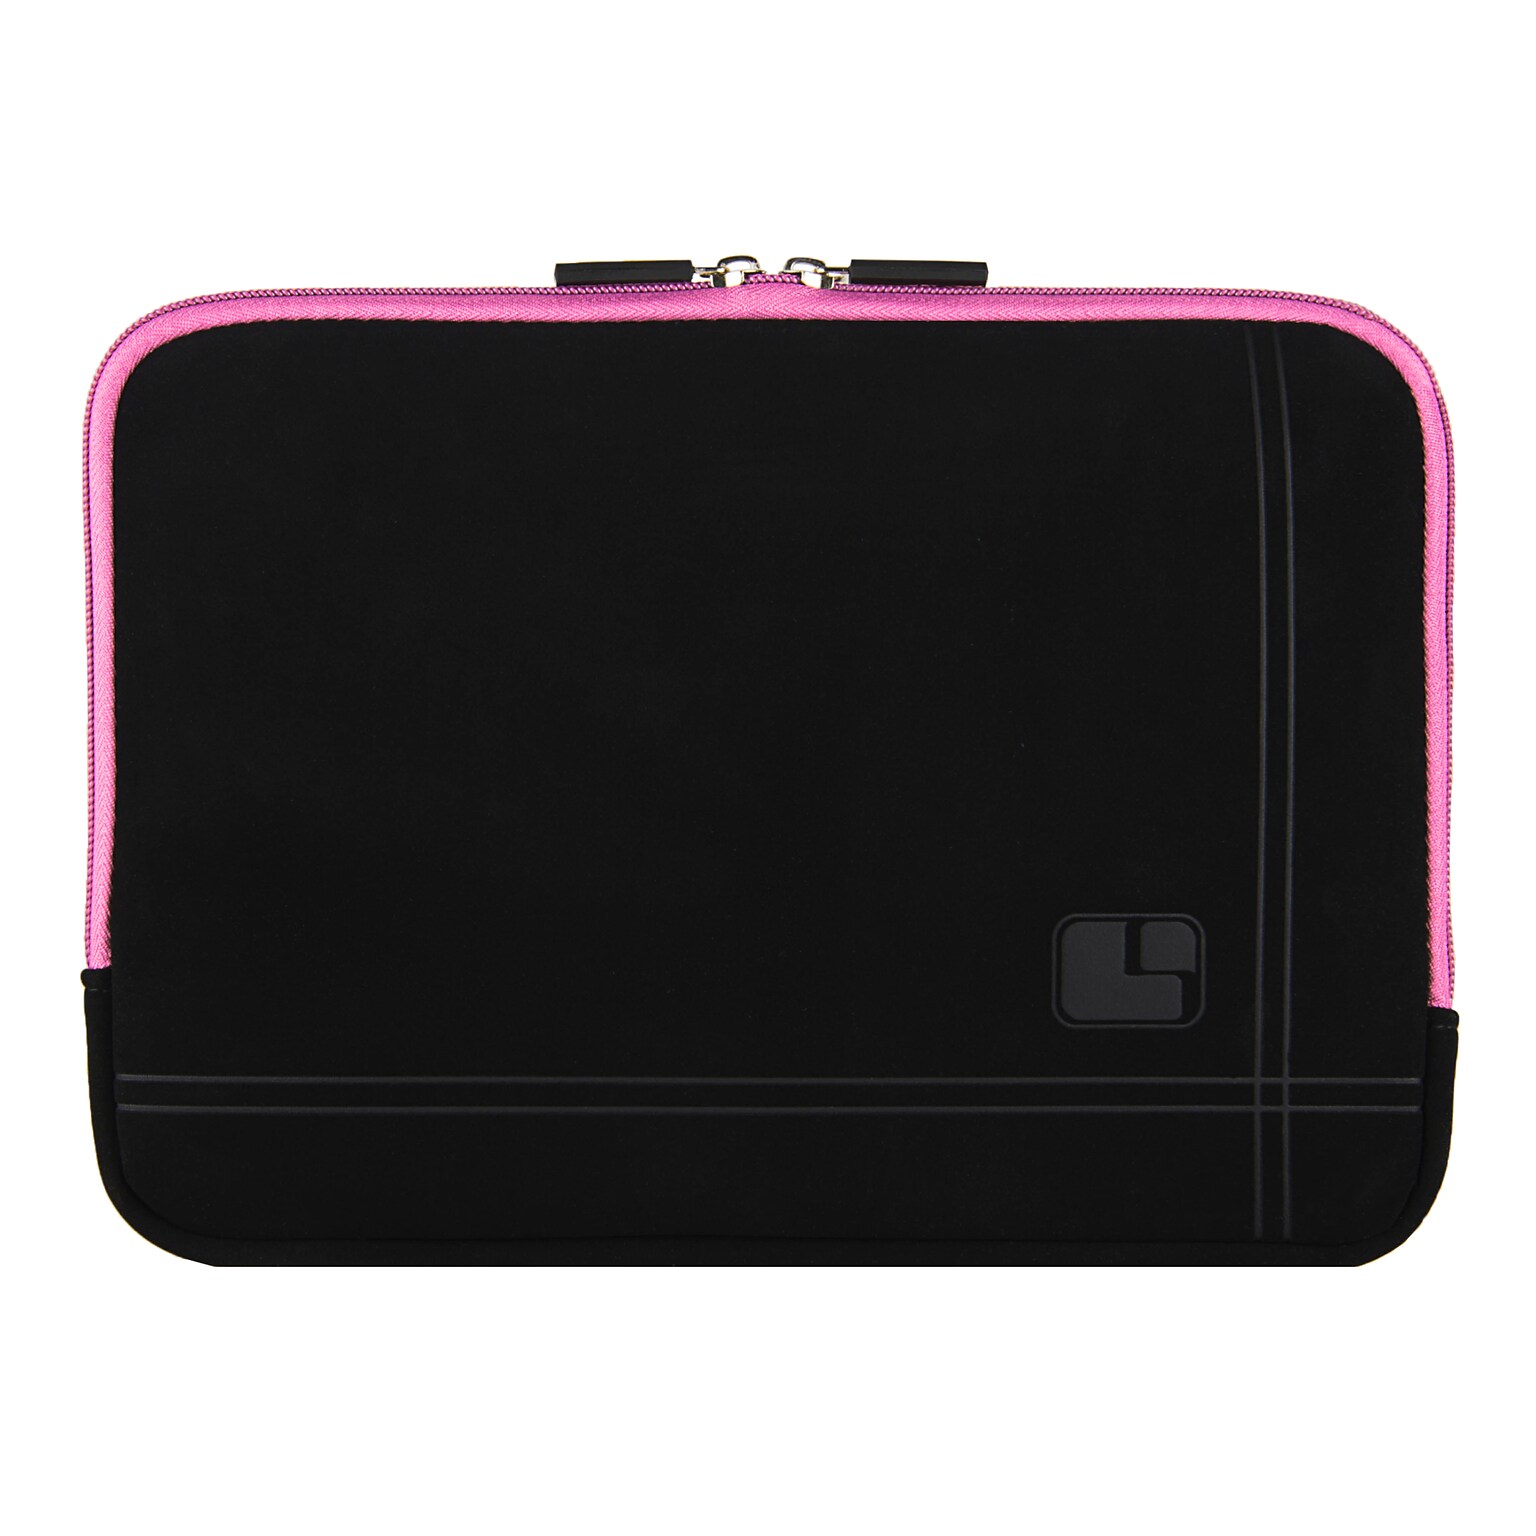 SumacLife Drumm Protective Neoprene Laptop Carrying Sleeve with Back Pocket (Black with Pink Edge)